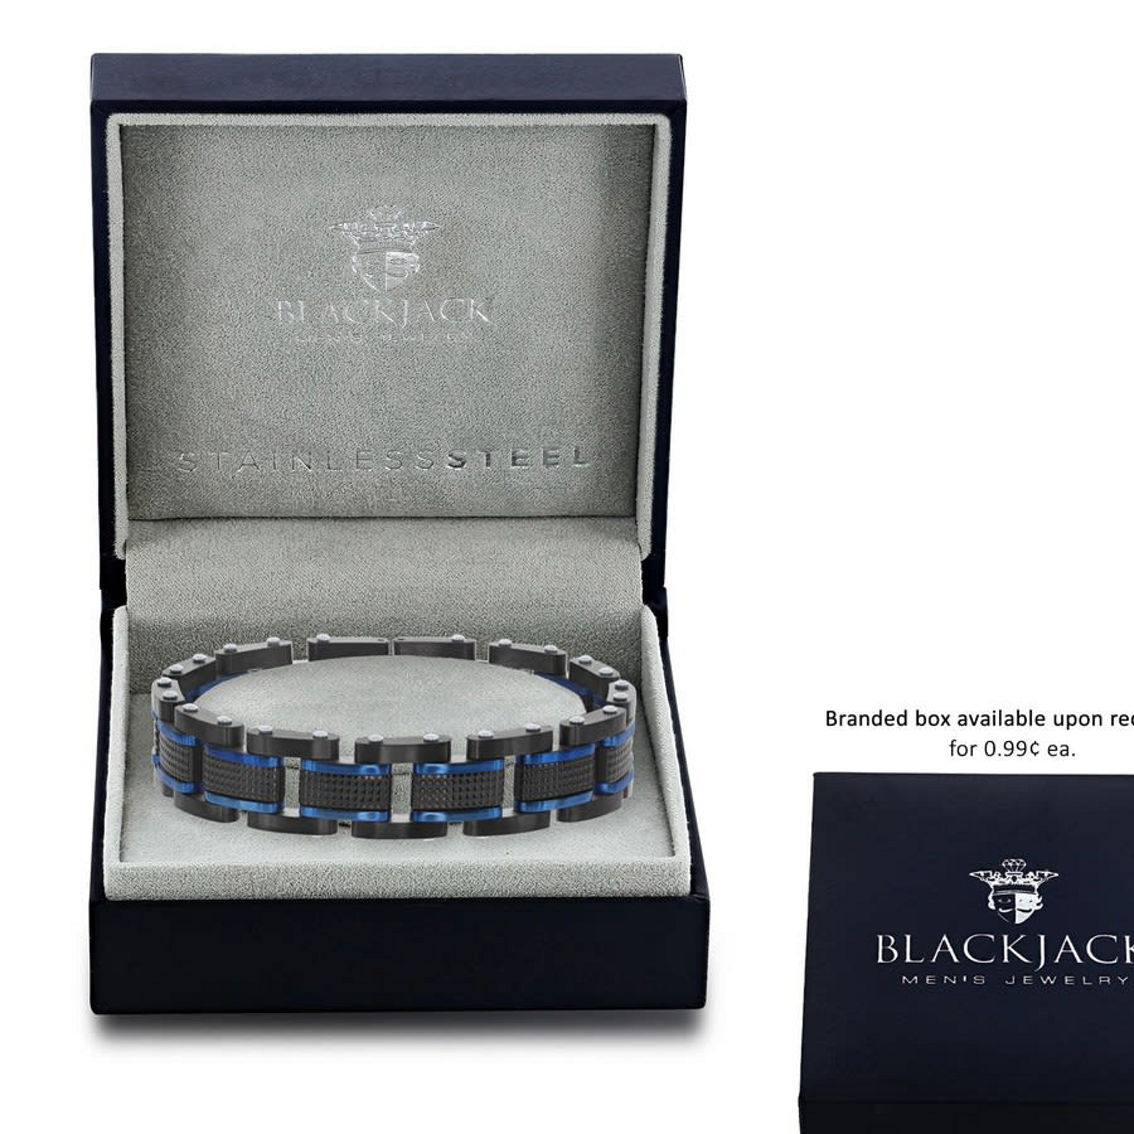 Metallo Stainless Steel Blue and Black Bracelet - Image 2 of 3